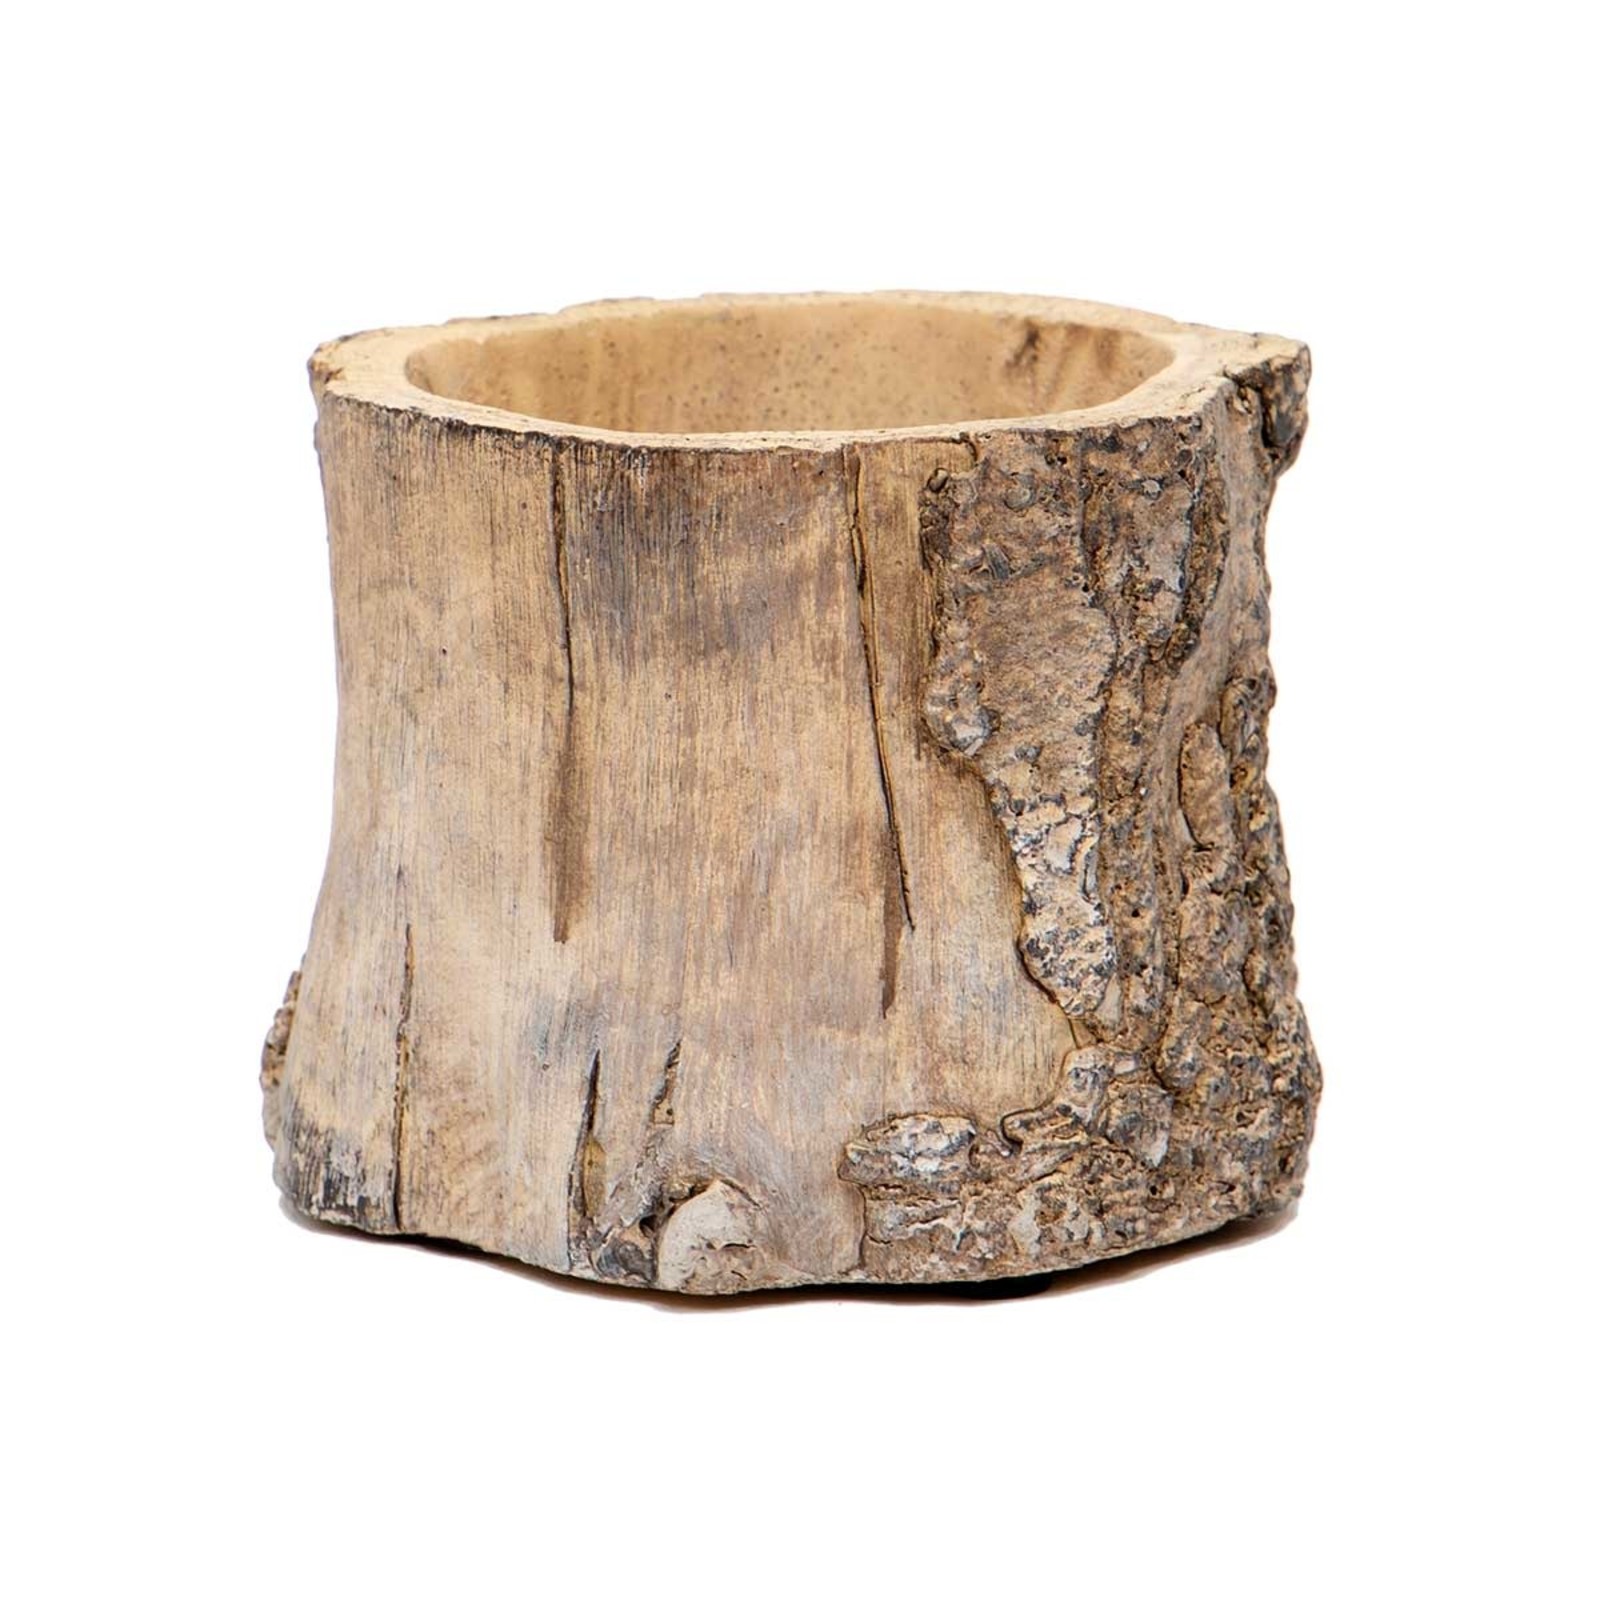 Meravic CONCRETE LOG POT BROWN WITH BARK TEXTURE SMALL    A3070 loading=